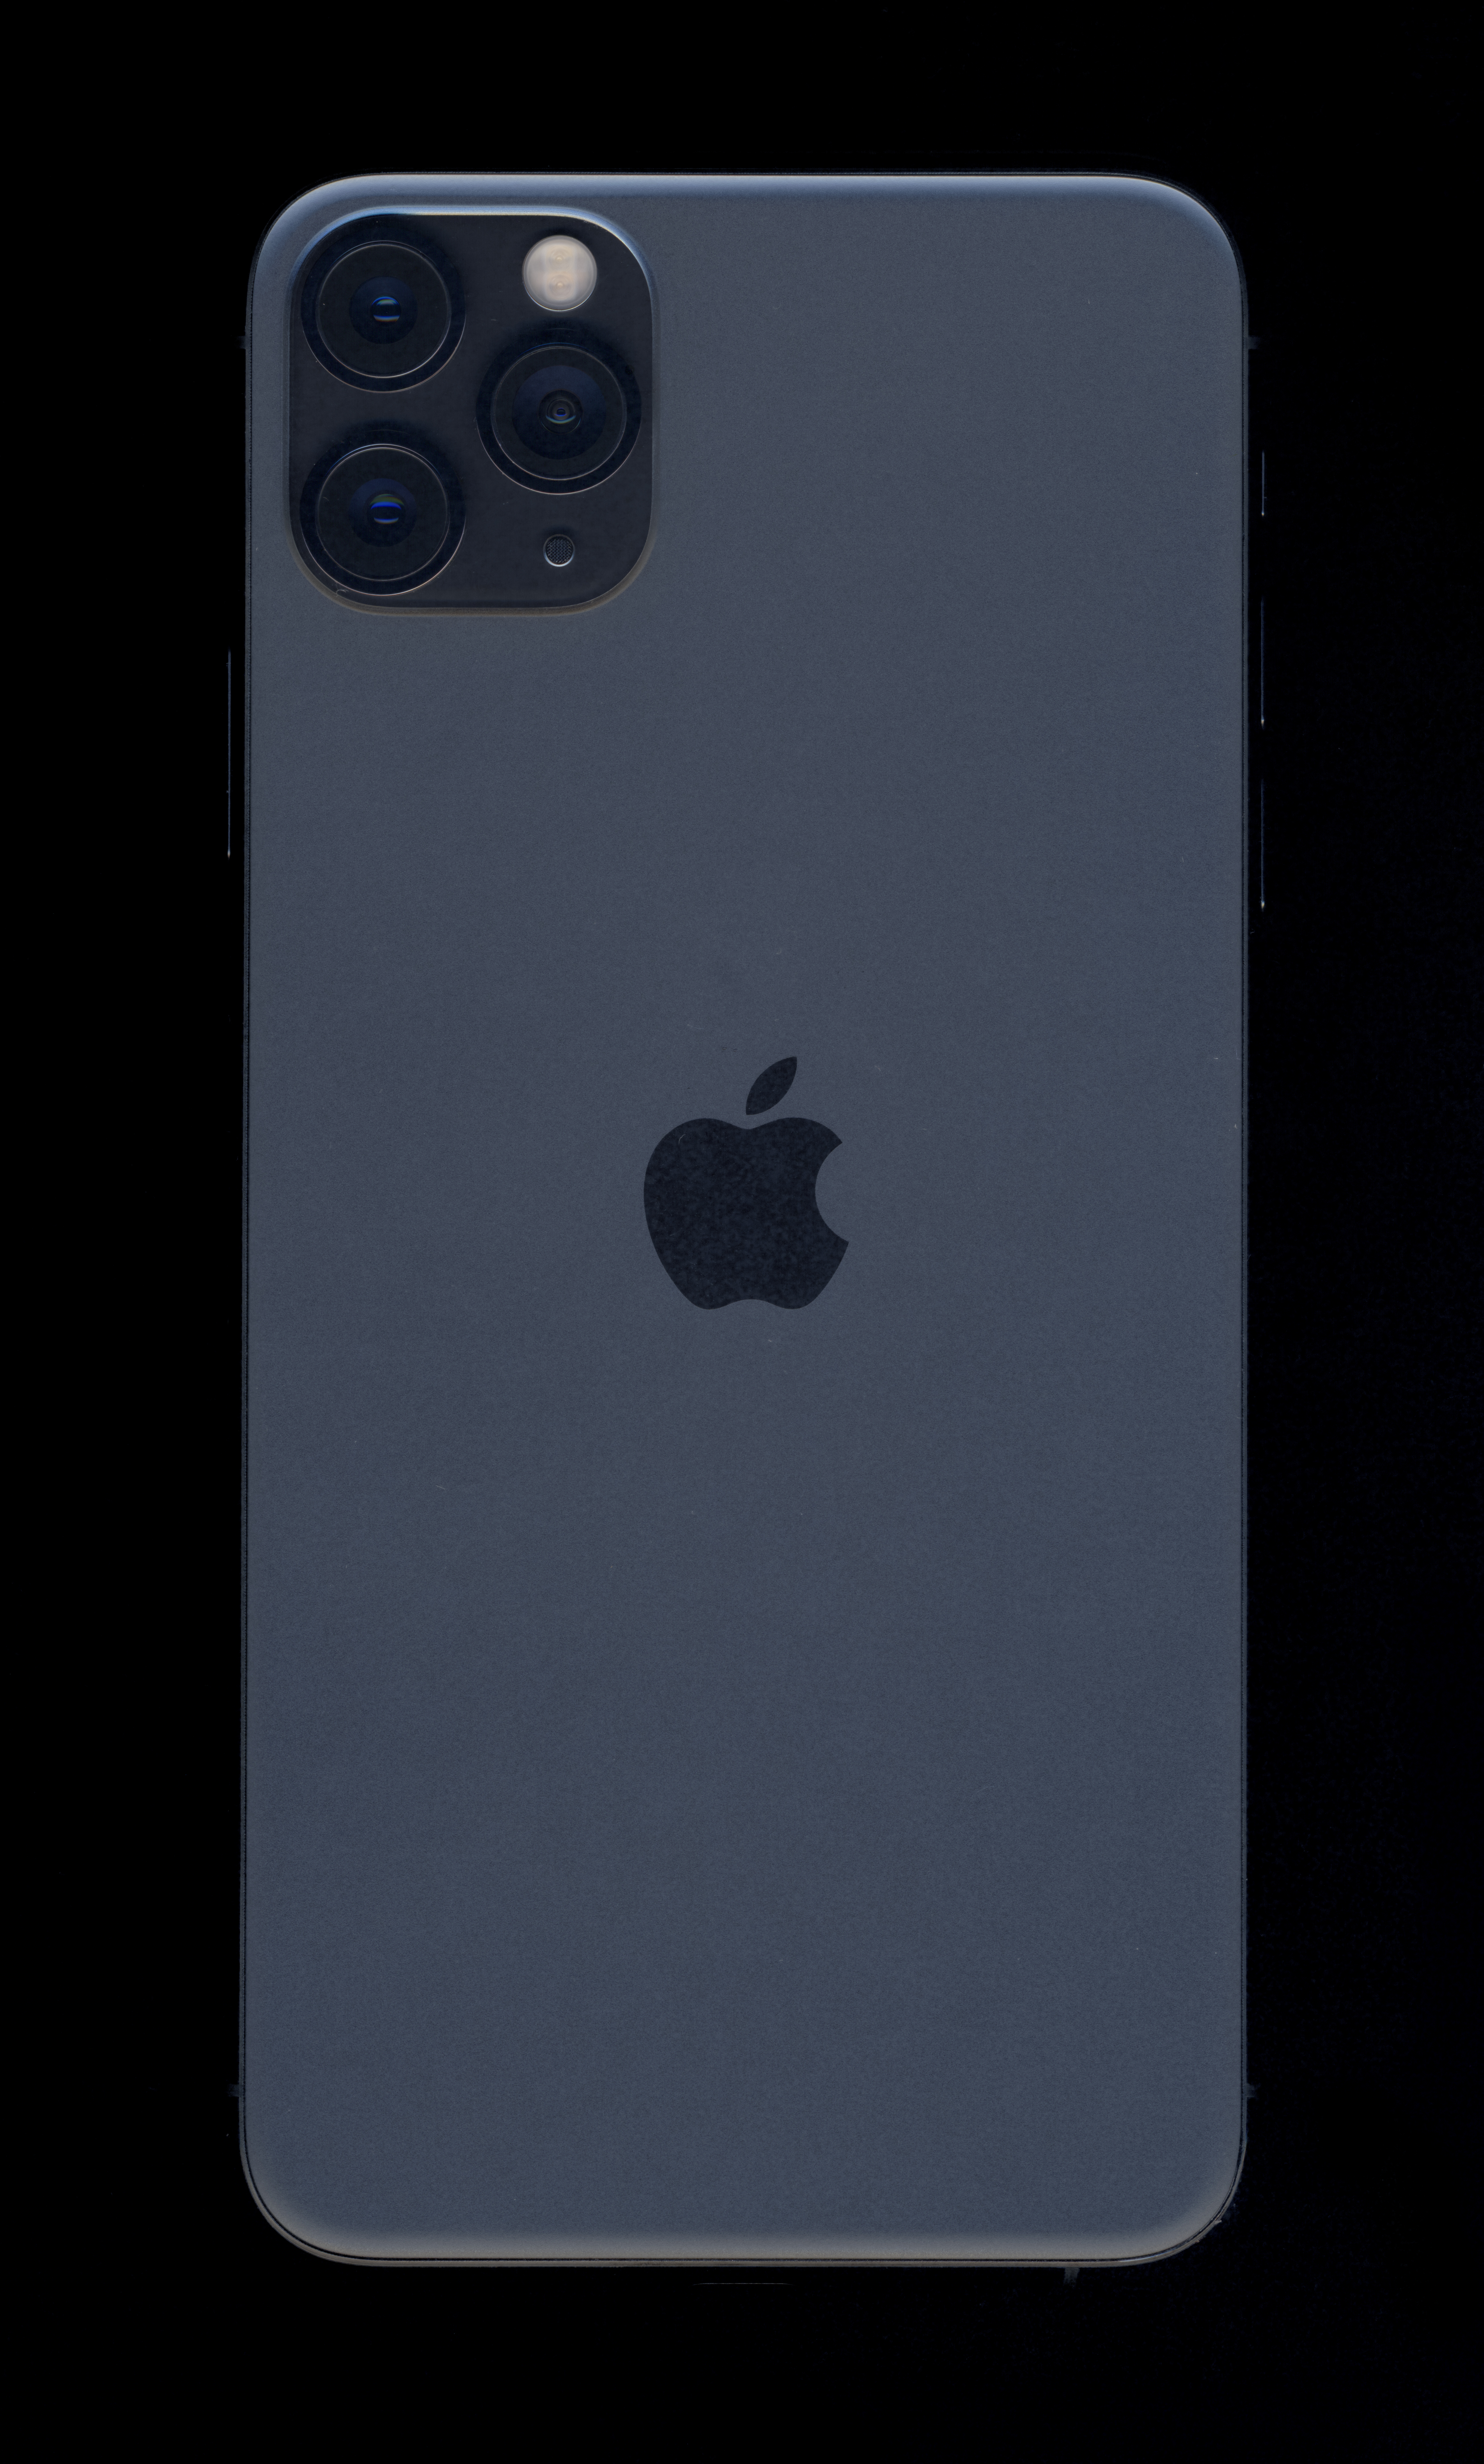 File Scan Of Back Of Iphone 11 Pro Max Space Grey Jpg Wikimedia Commons